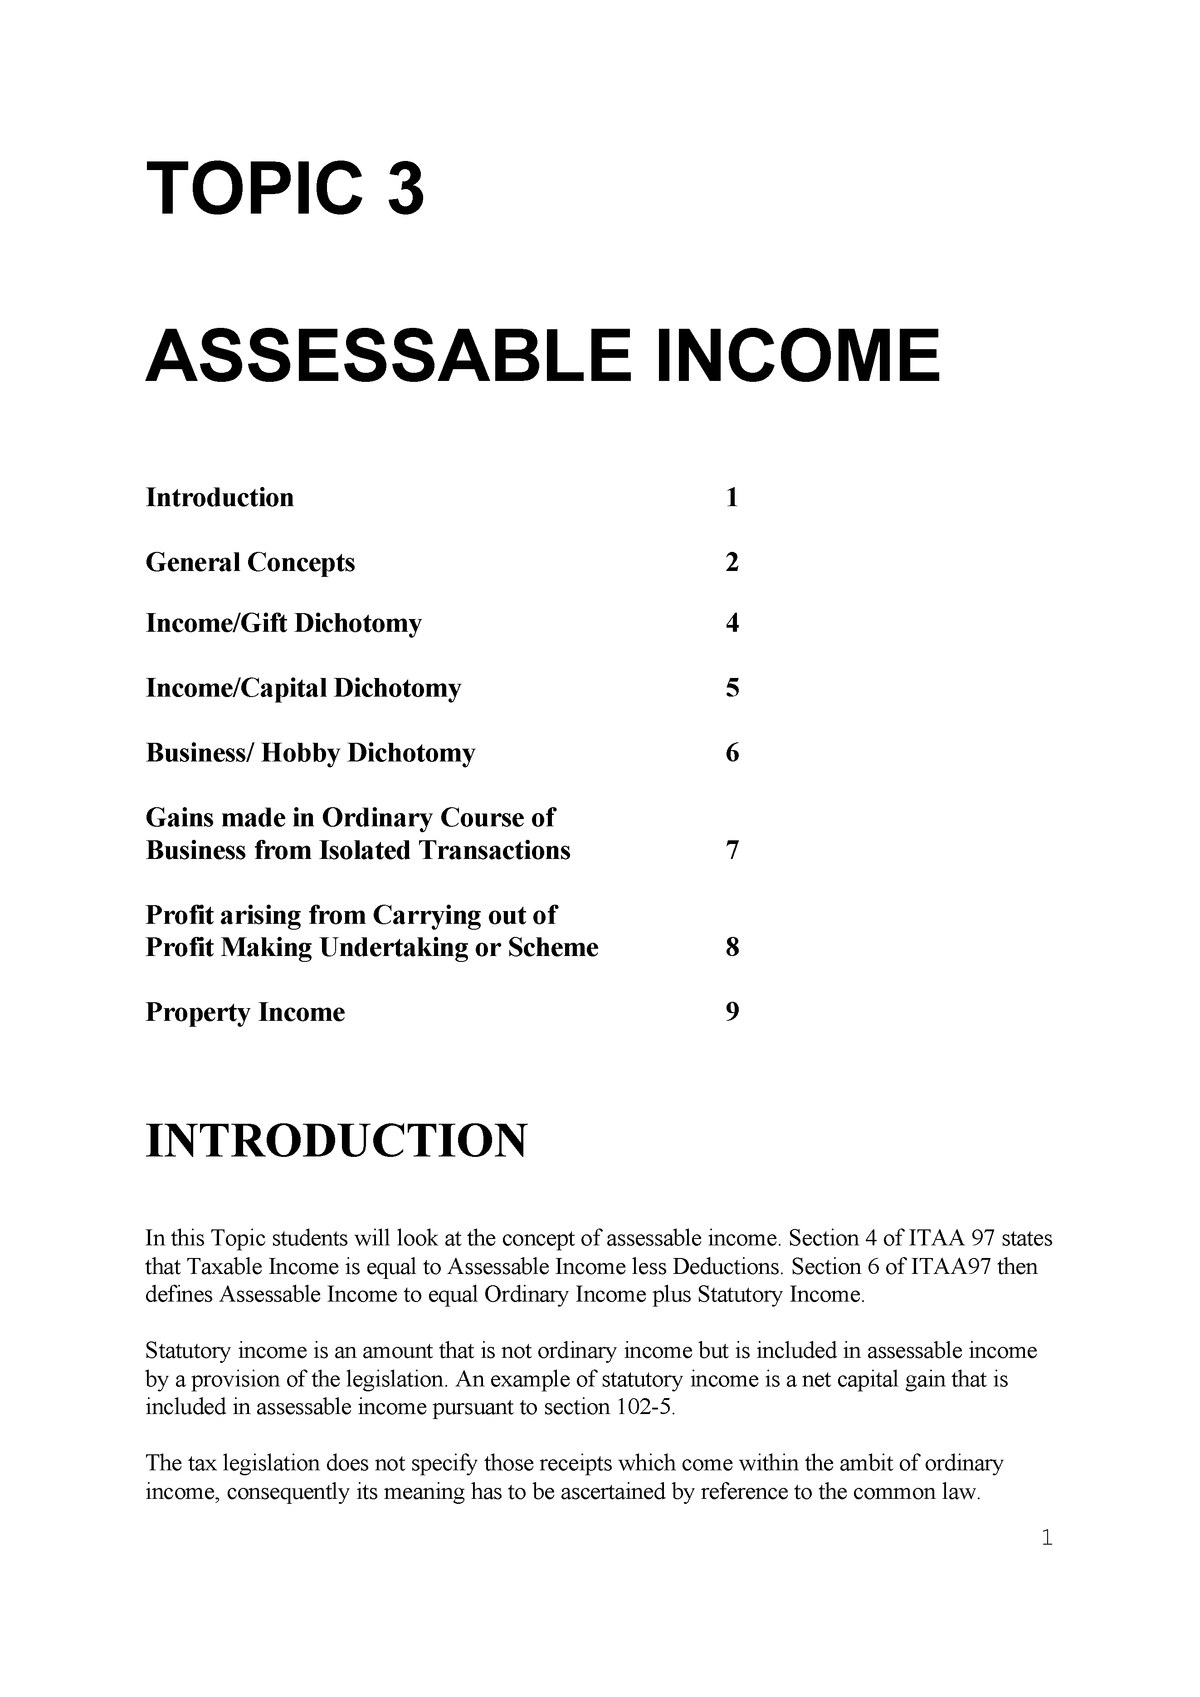 thesis study about income